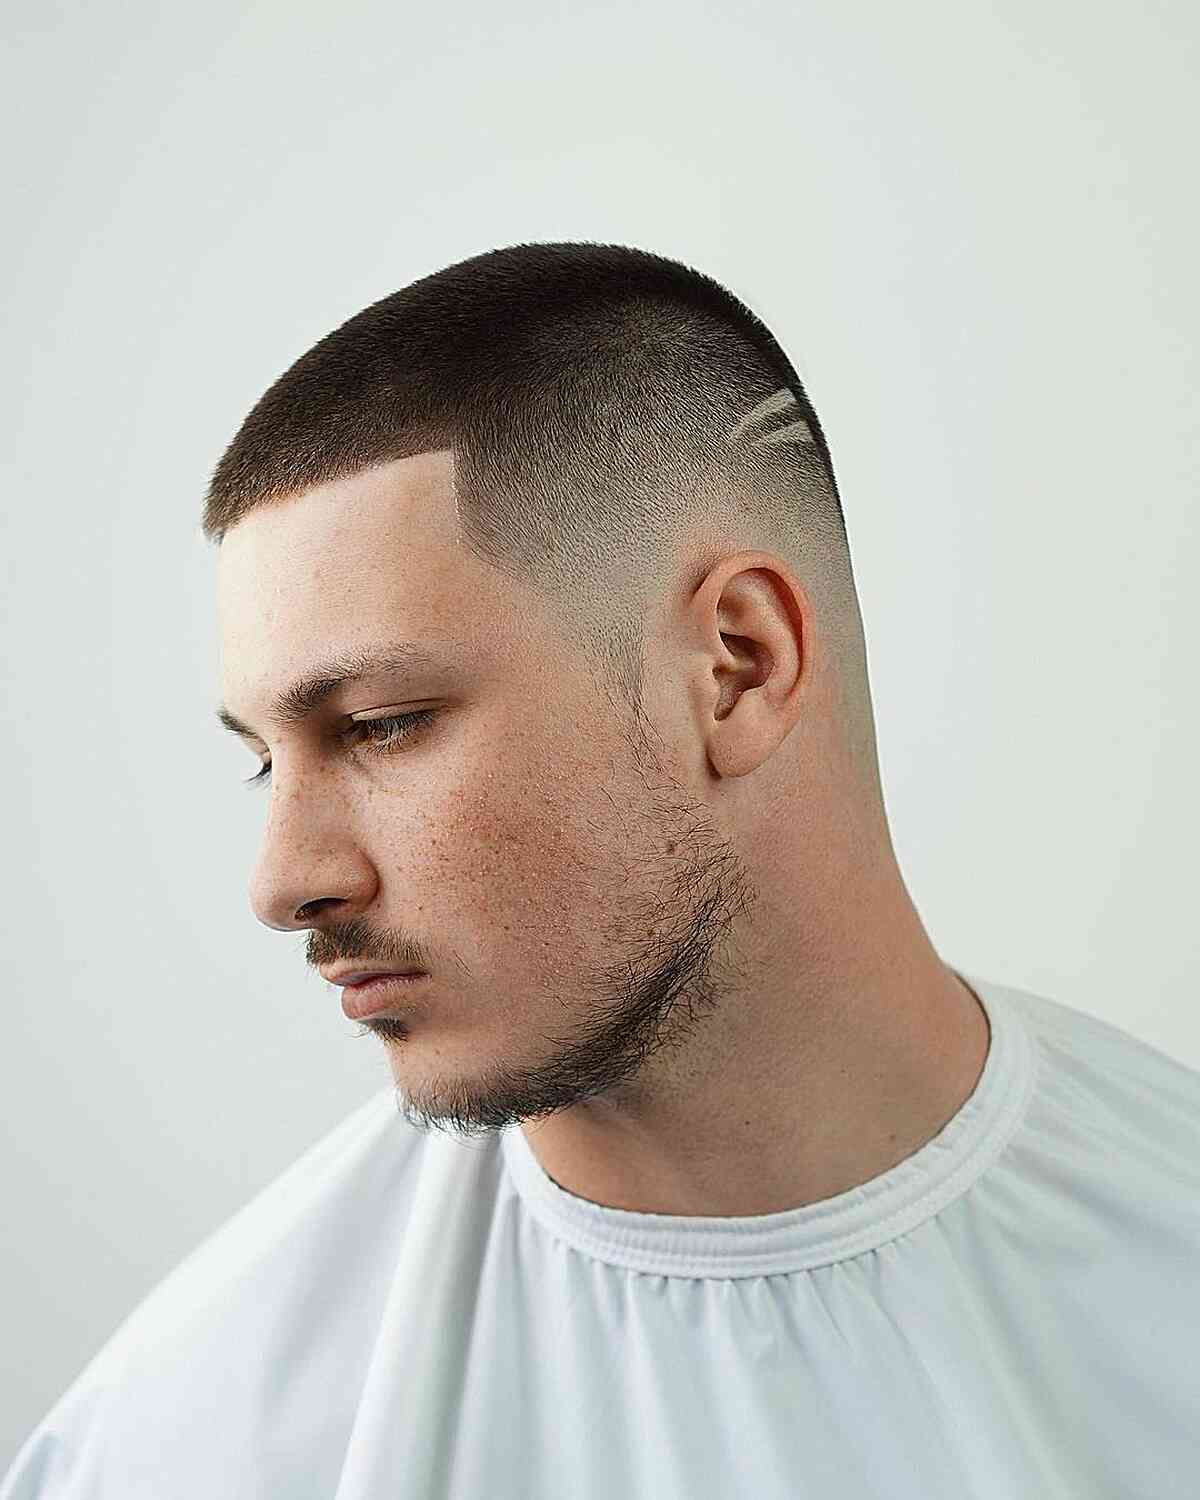 Picture of a man rocking the buzz cut